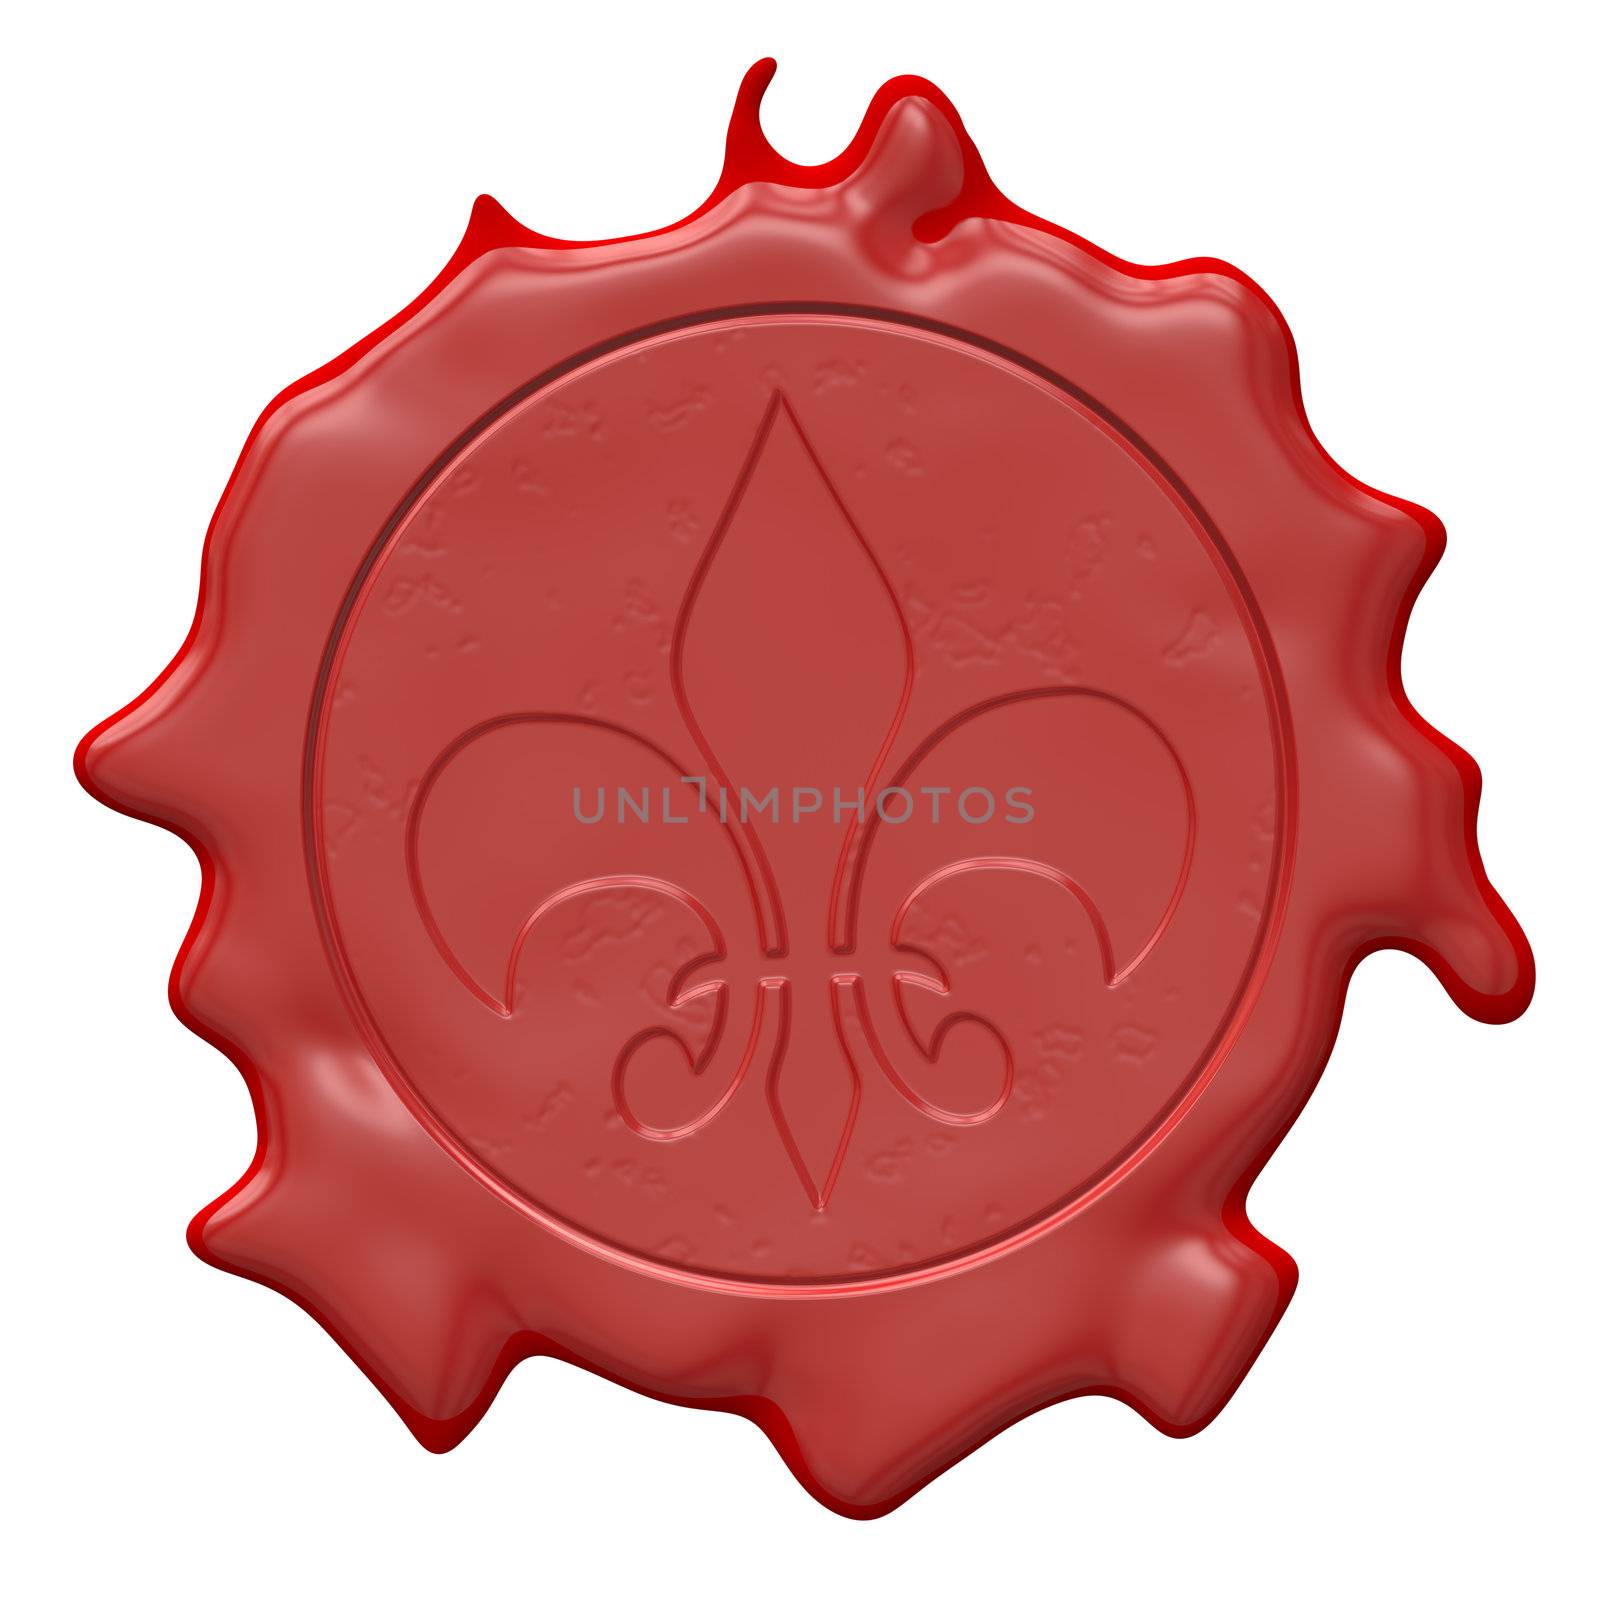 An image of a red seal of wax